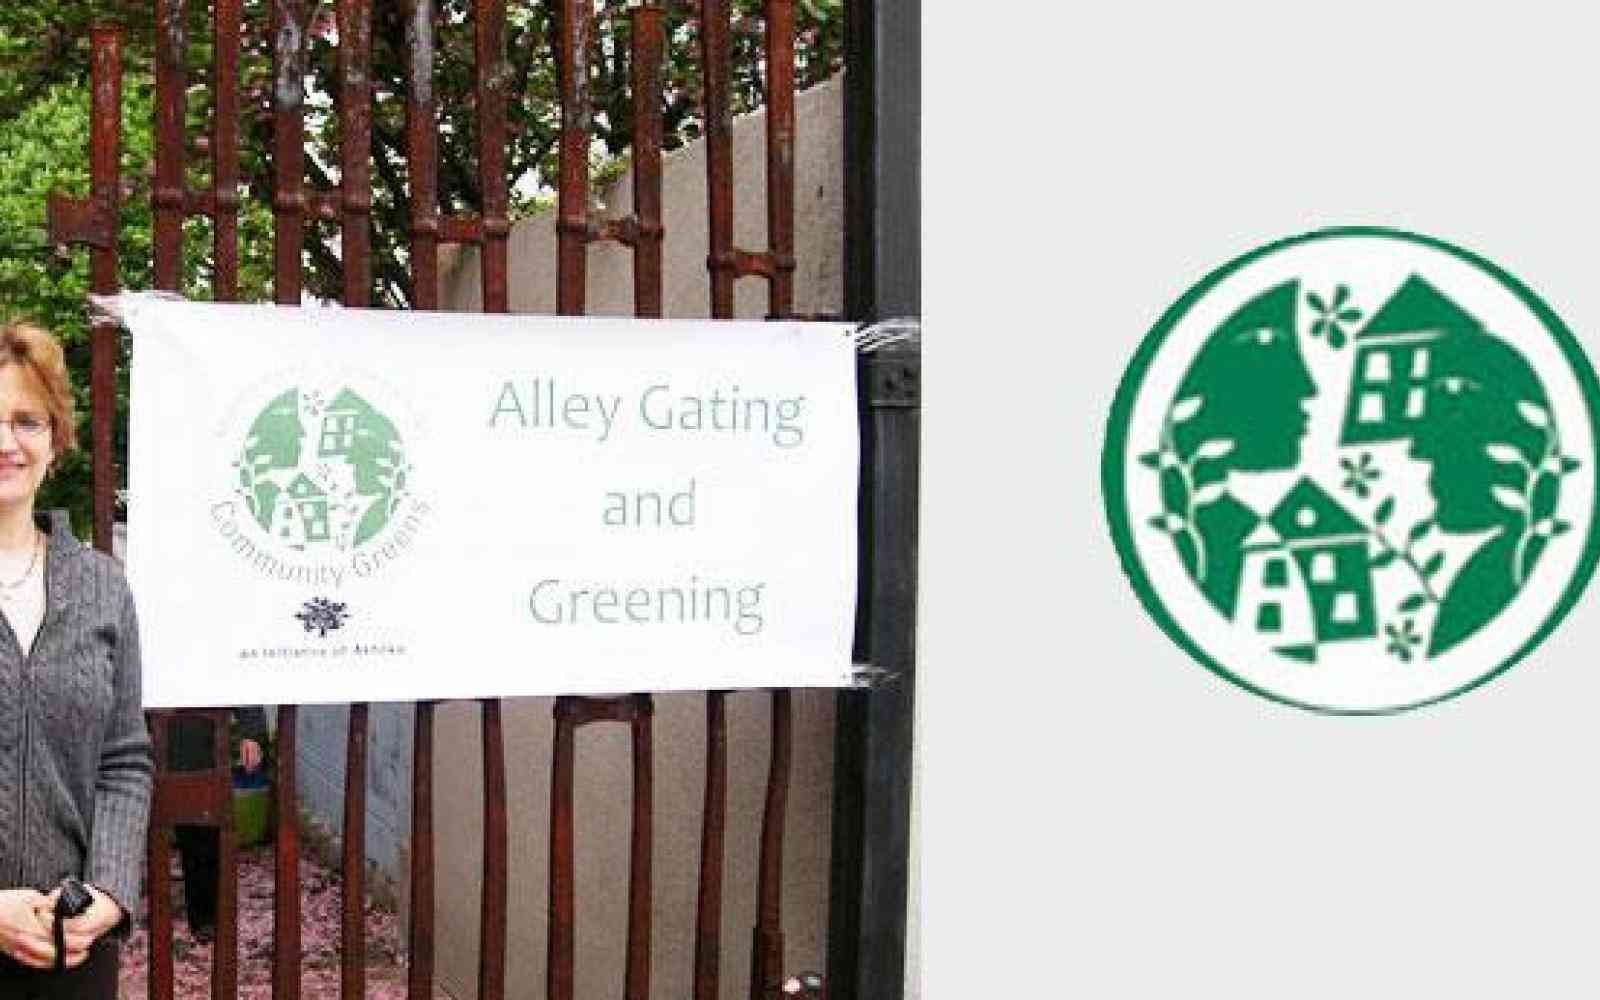 Alley Gating and Greening